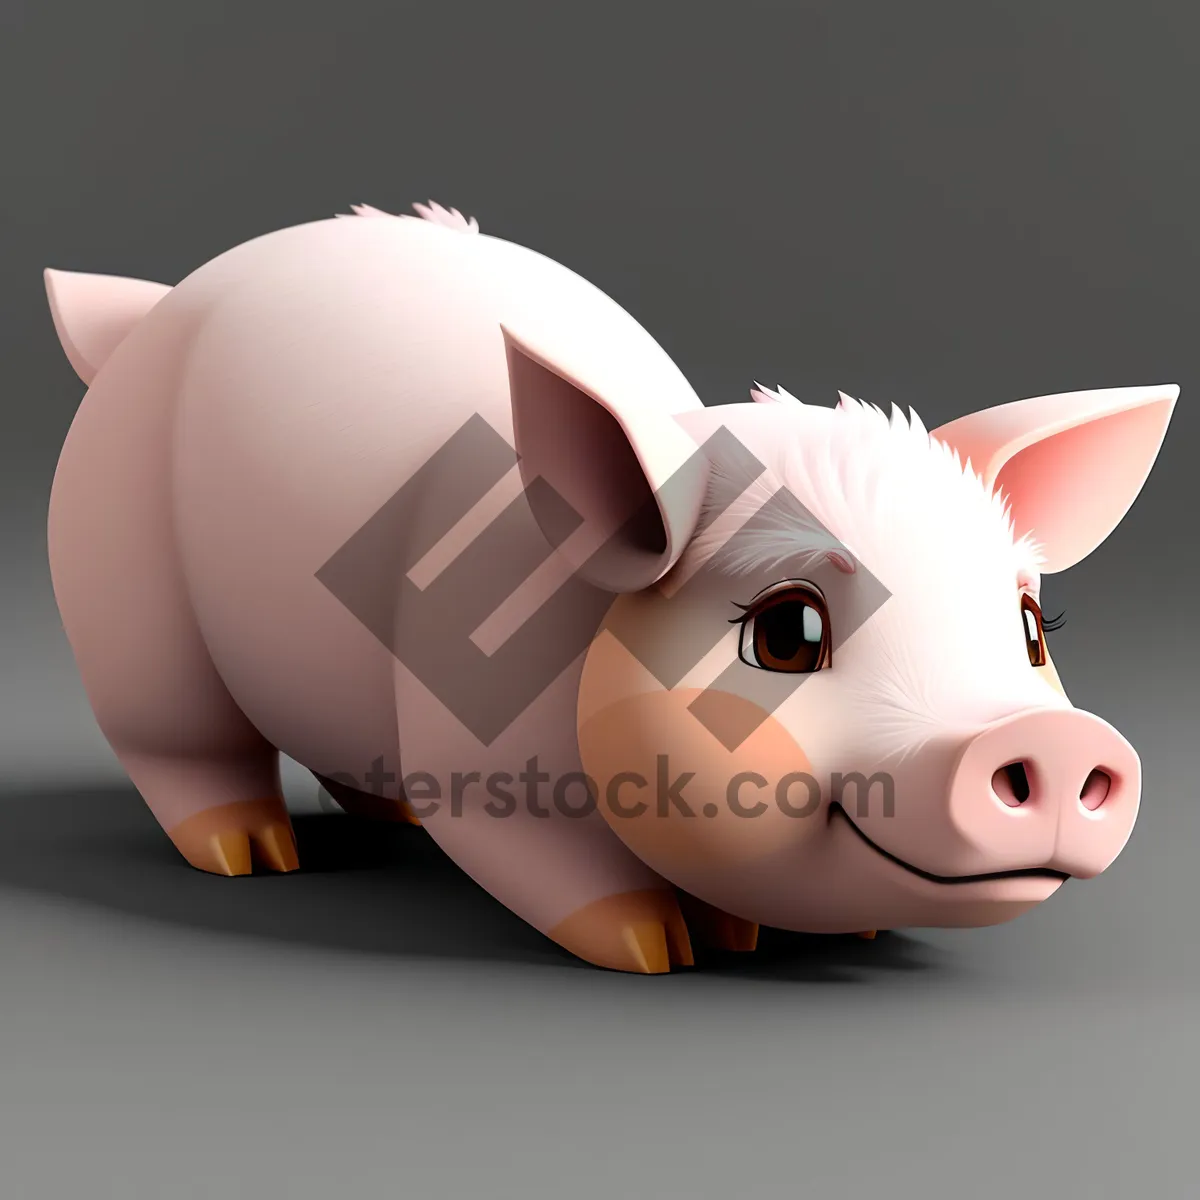 Picture of Pink Ceramic Piggy Bank with Coins